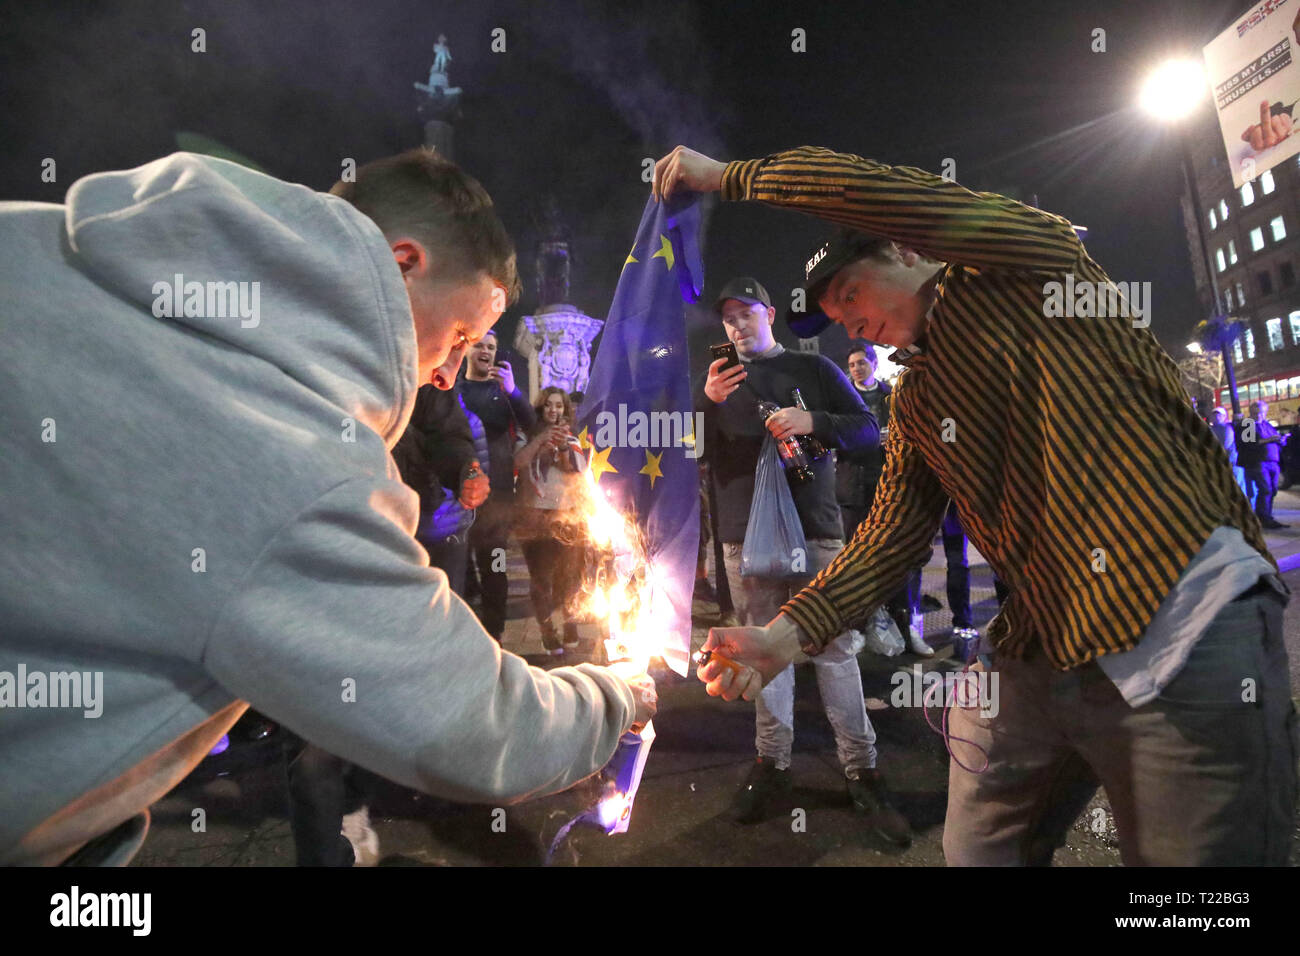 Pro-Brexit supporters burn a EU flag near to Trafalgar Square in central London, following the March to Leave protest. Stock Photo